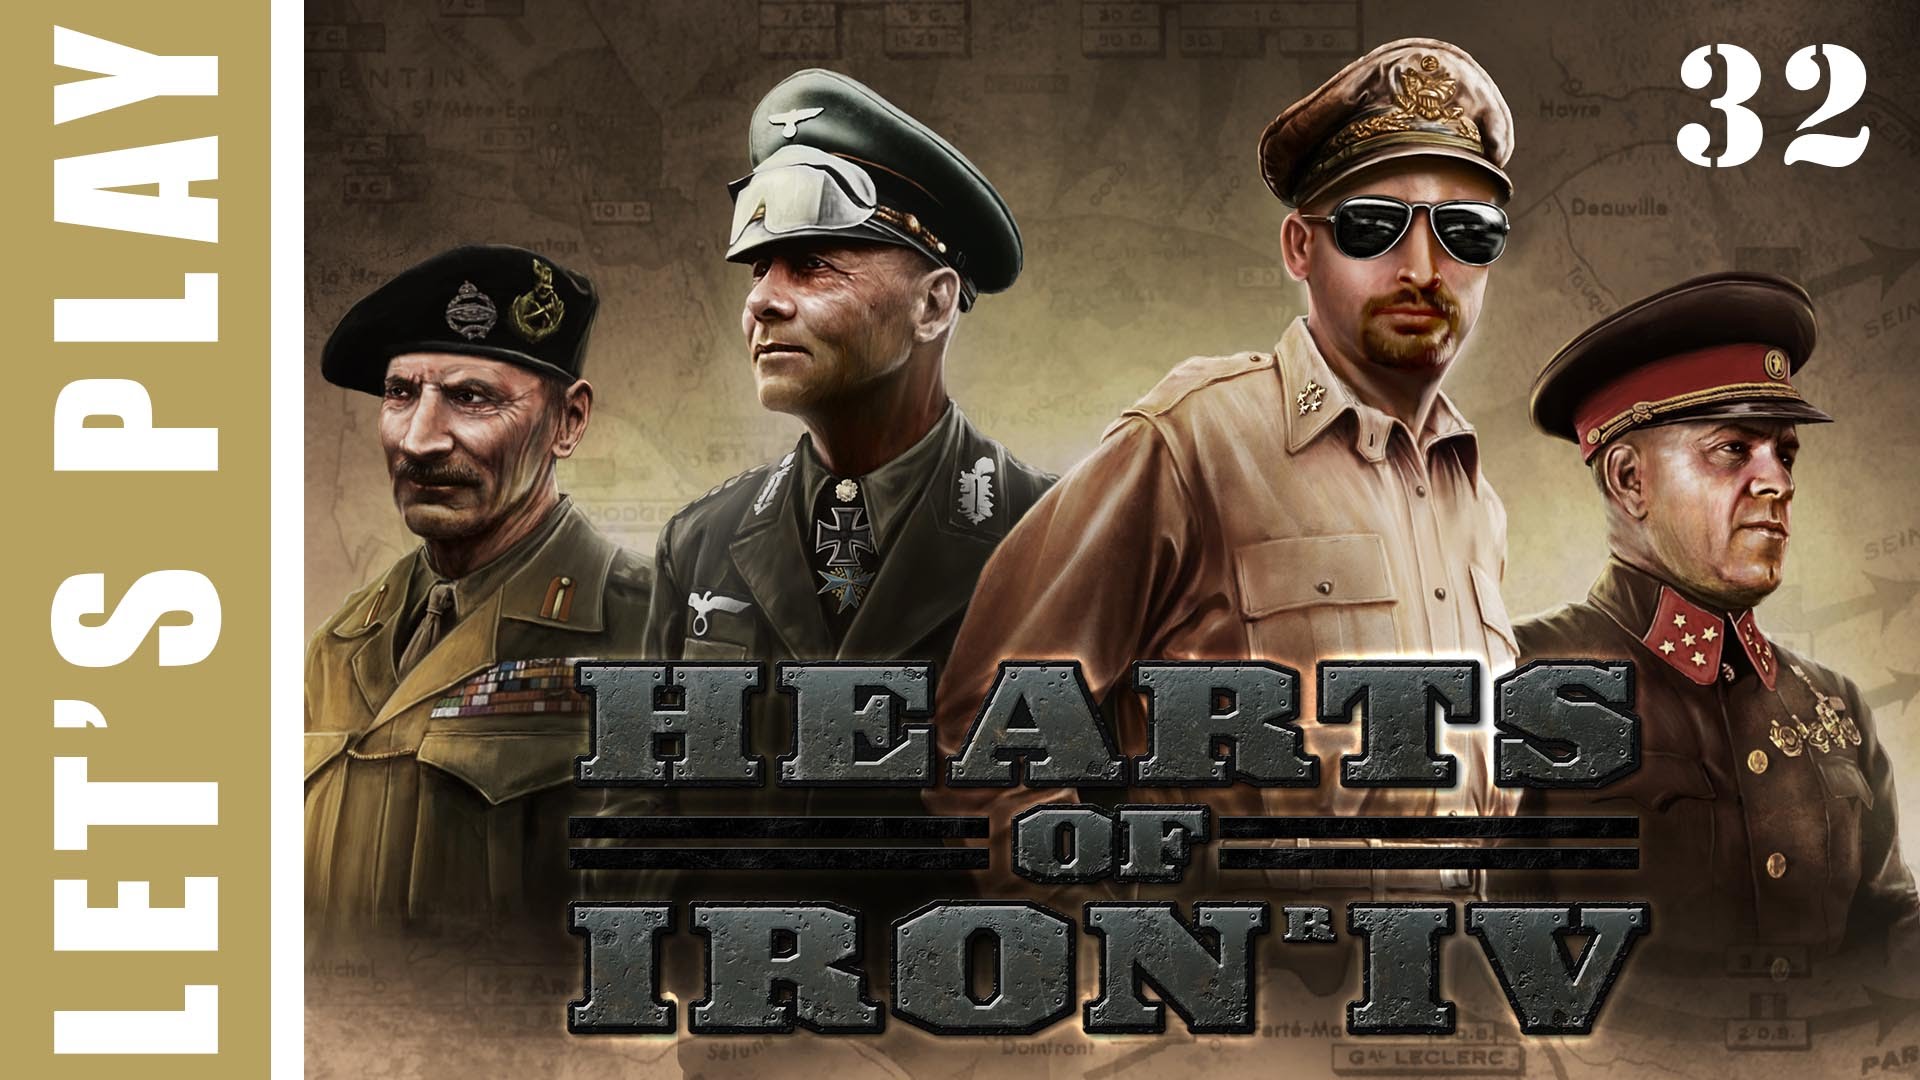 Hearts of Iron IV Germany Wins World War 2 Let’s Play Final